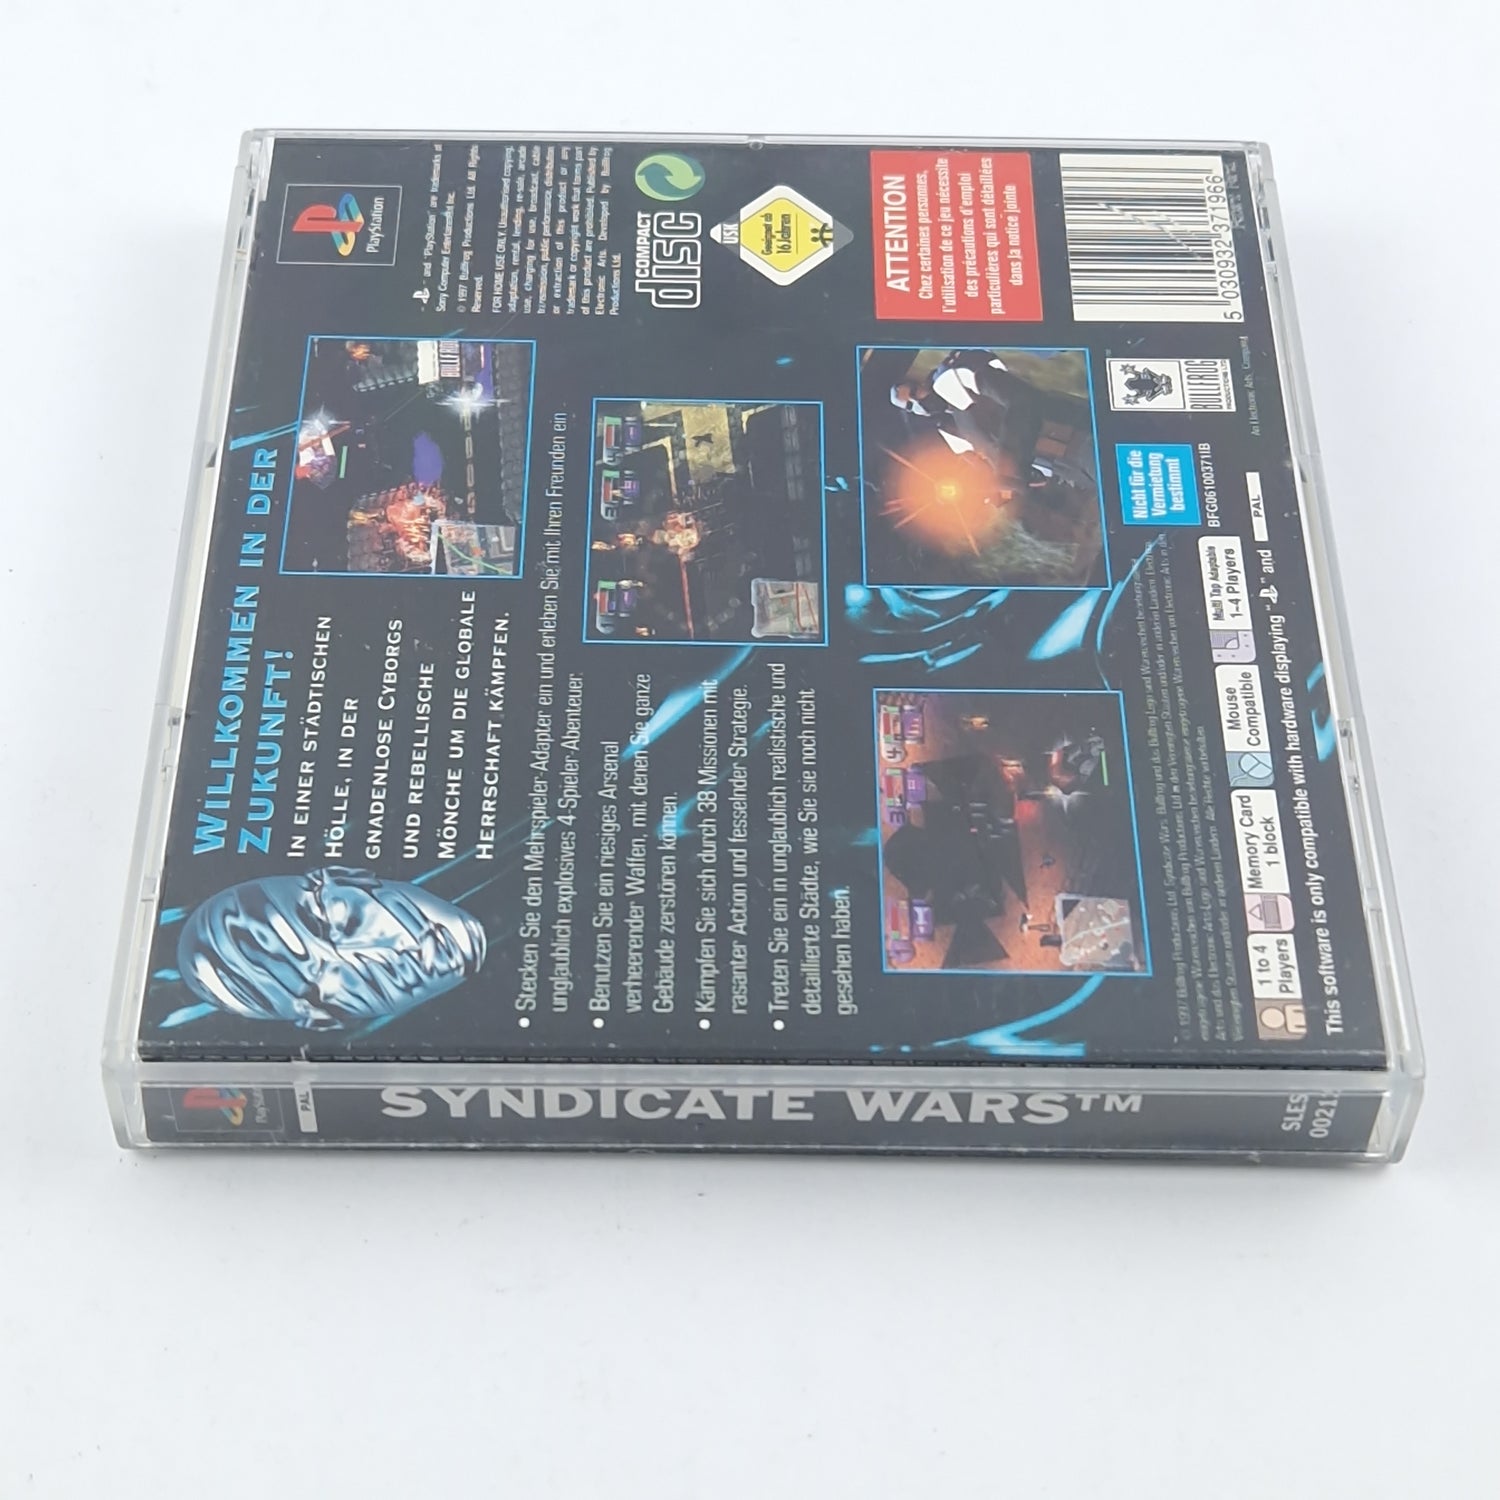 Playstation 1 Game: Syndicate Wars - Sony PS1 PSX / OVP Instructions CD PAL